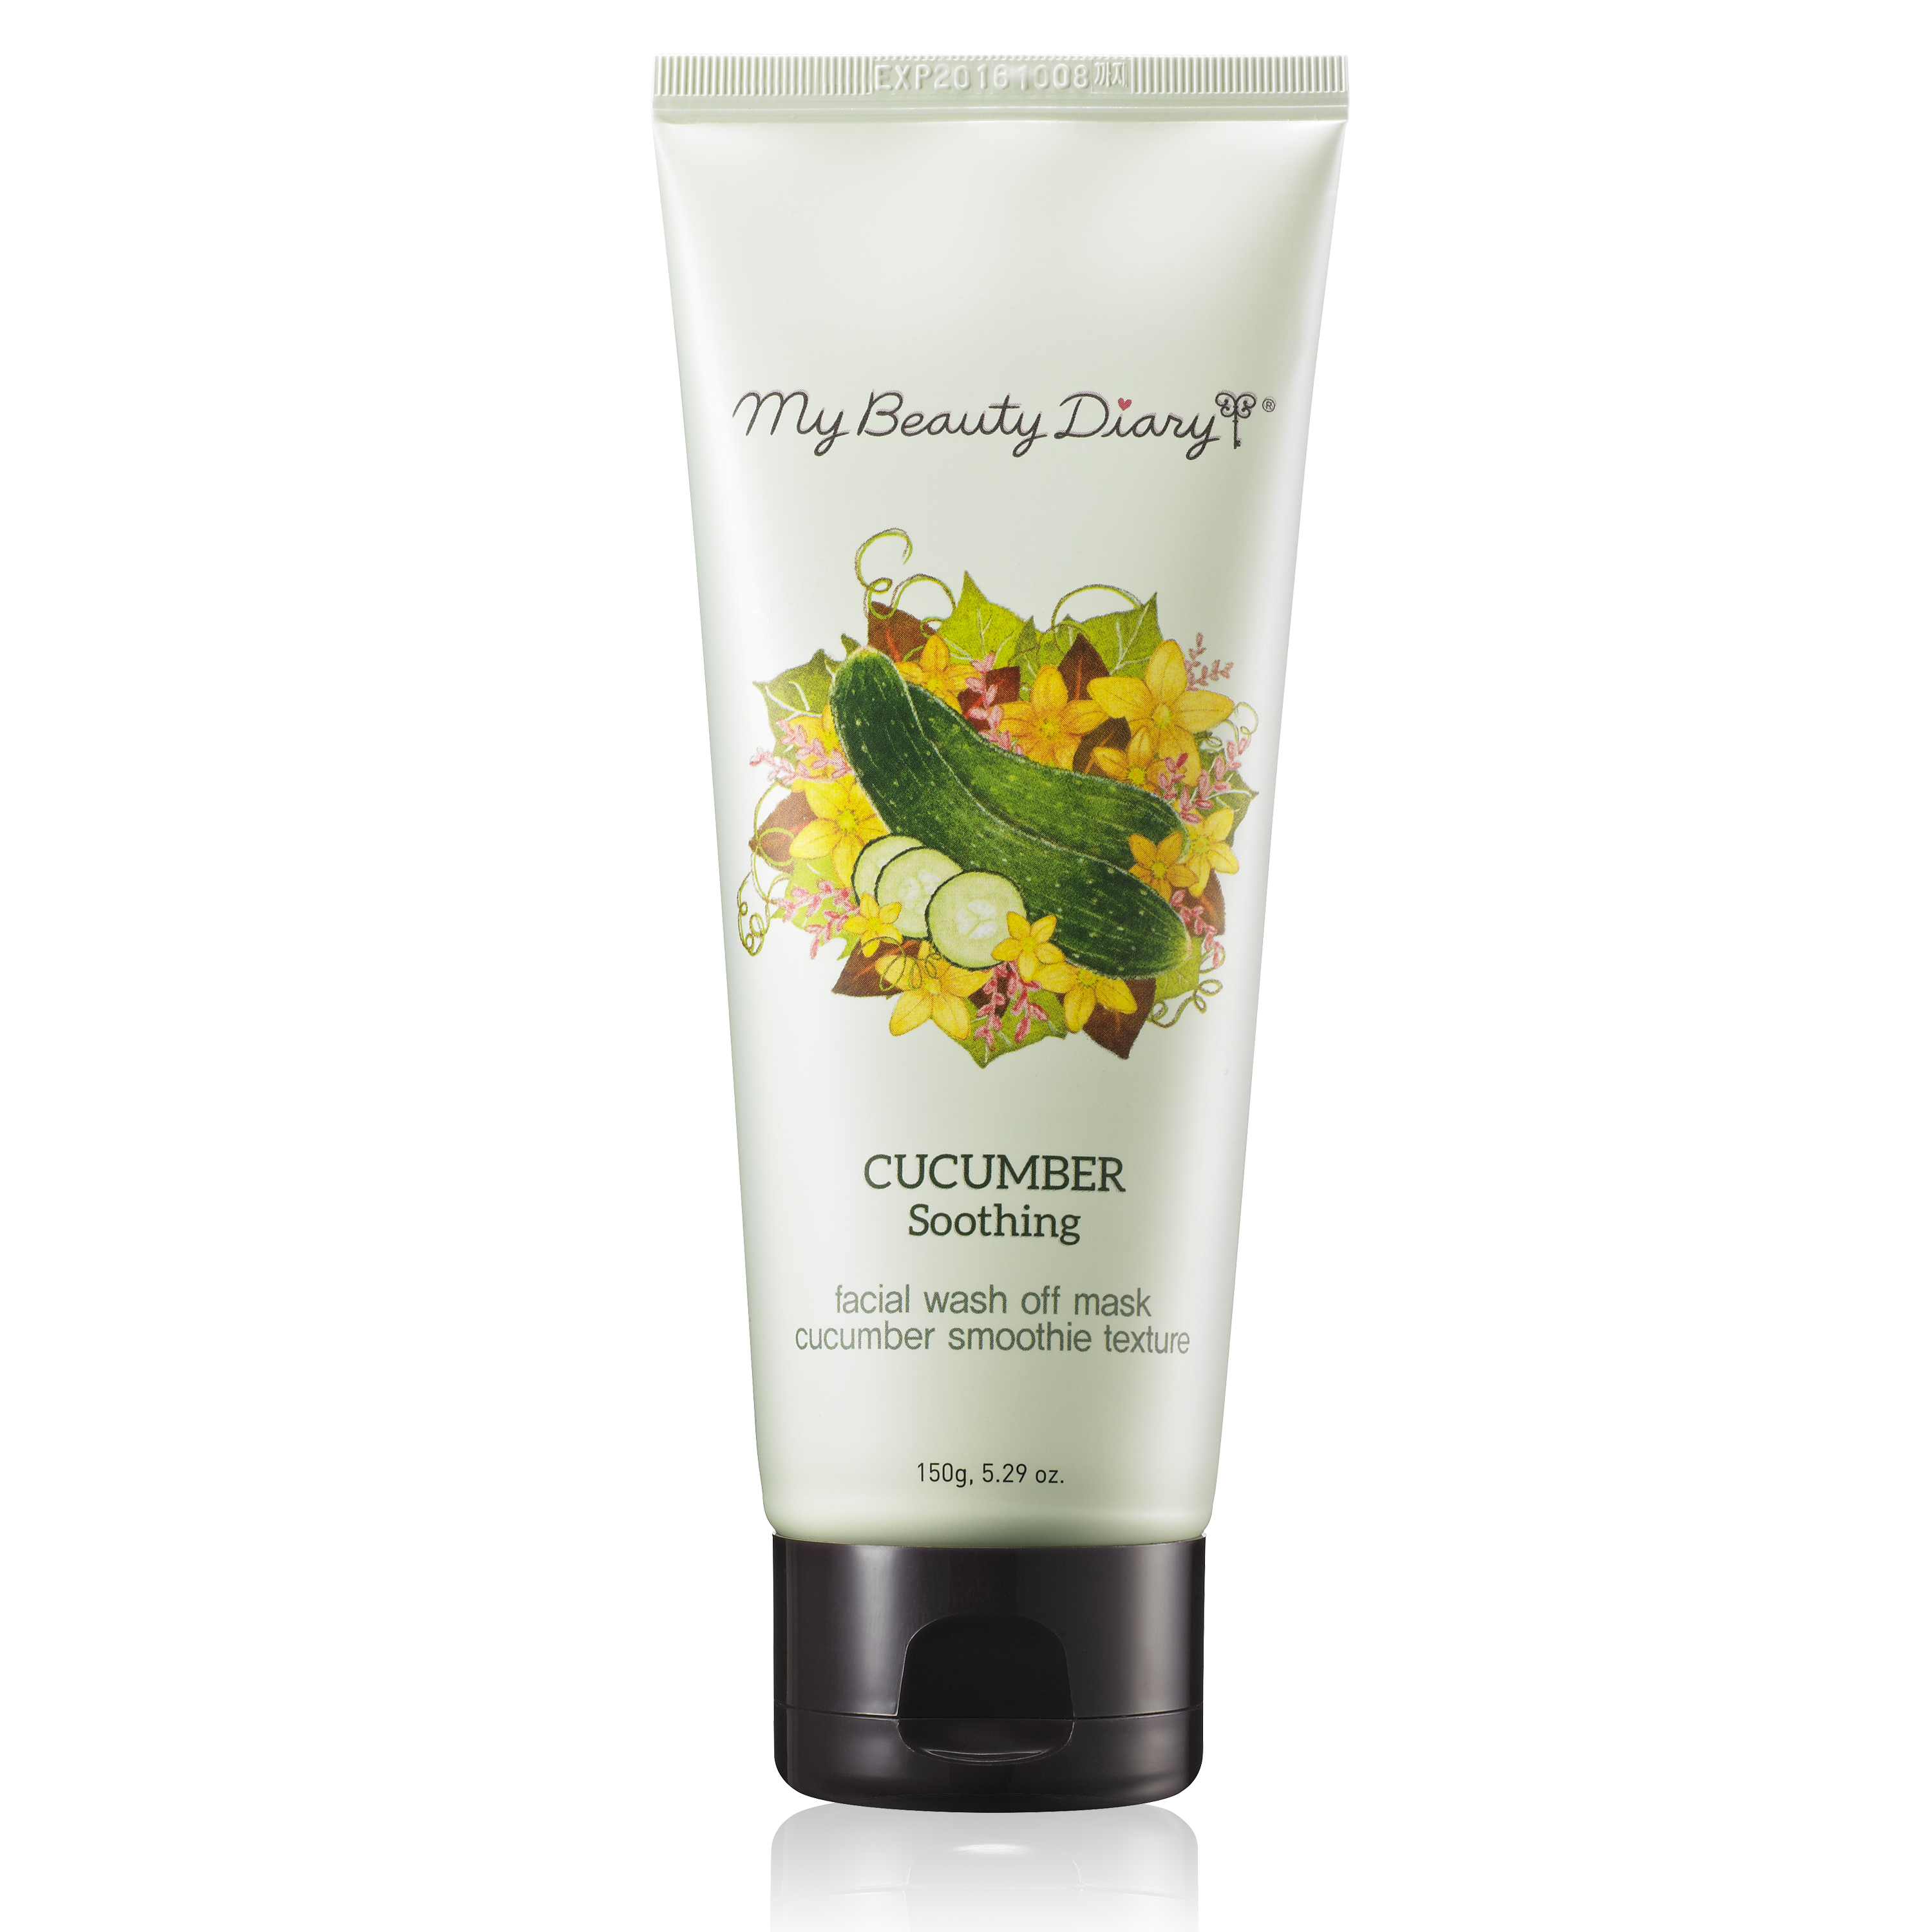 My Beauty Diary Mask-880246 Cucumber Soothing Mask 150g